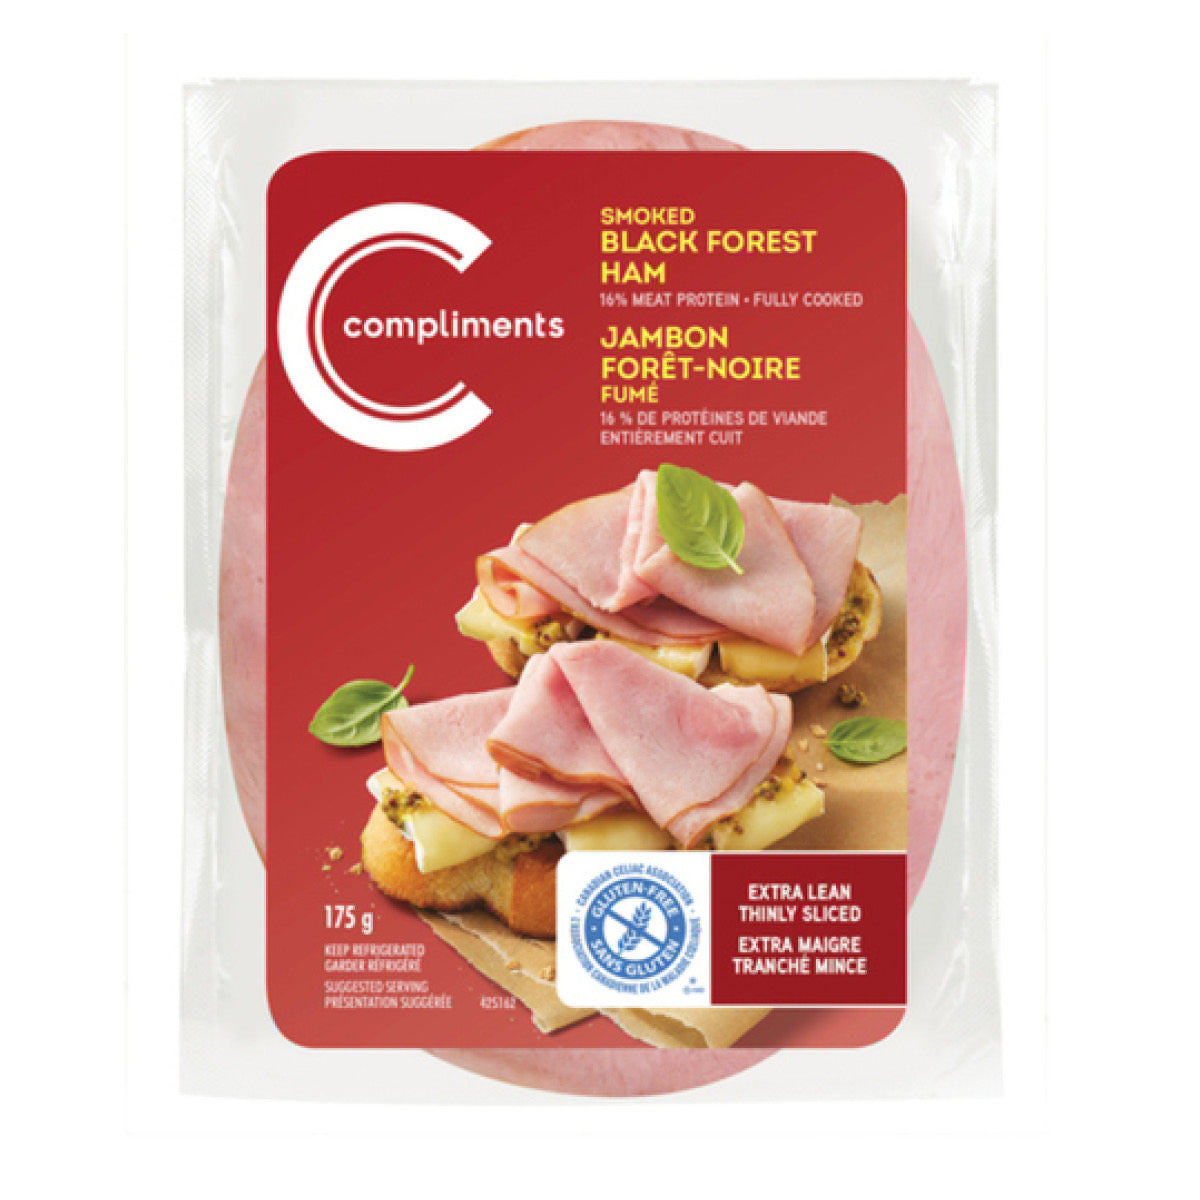 Compliments Ham, Black Forest, Extra Lean,Thinly Sliced,175g